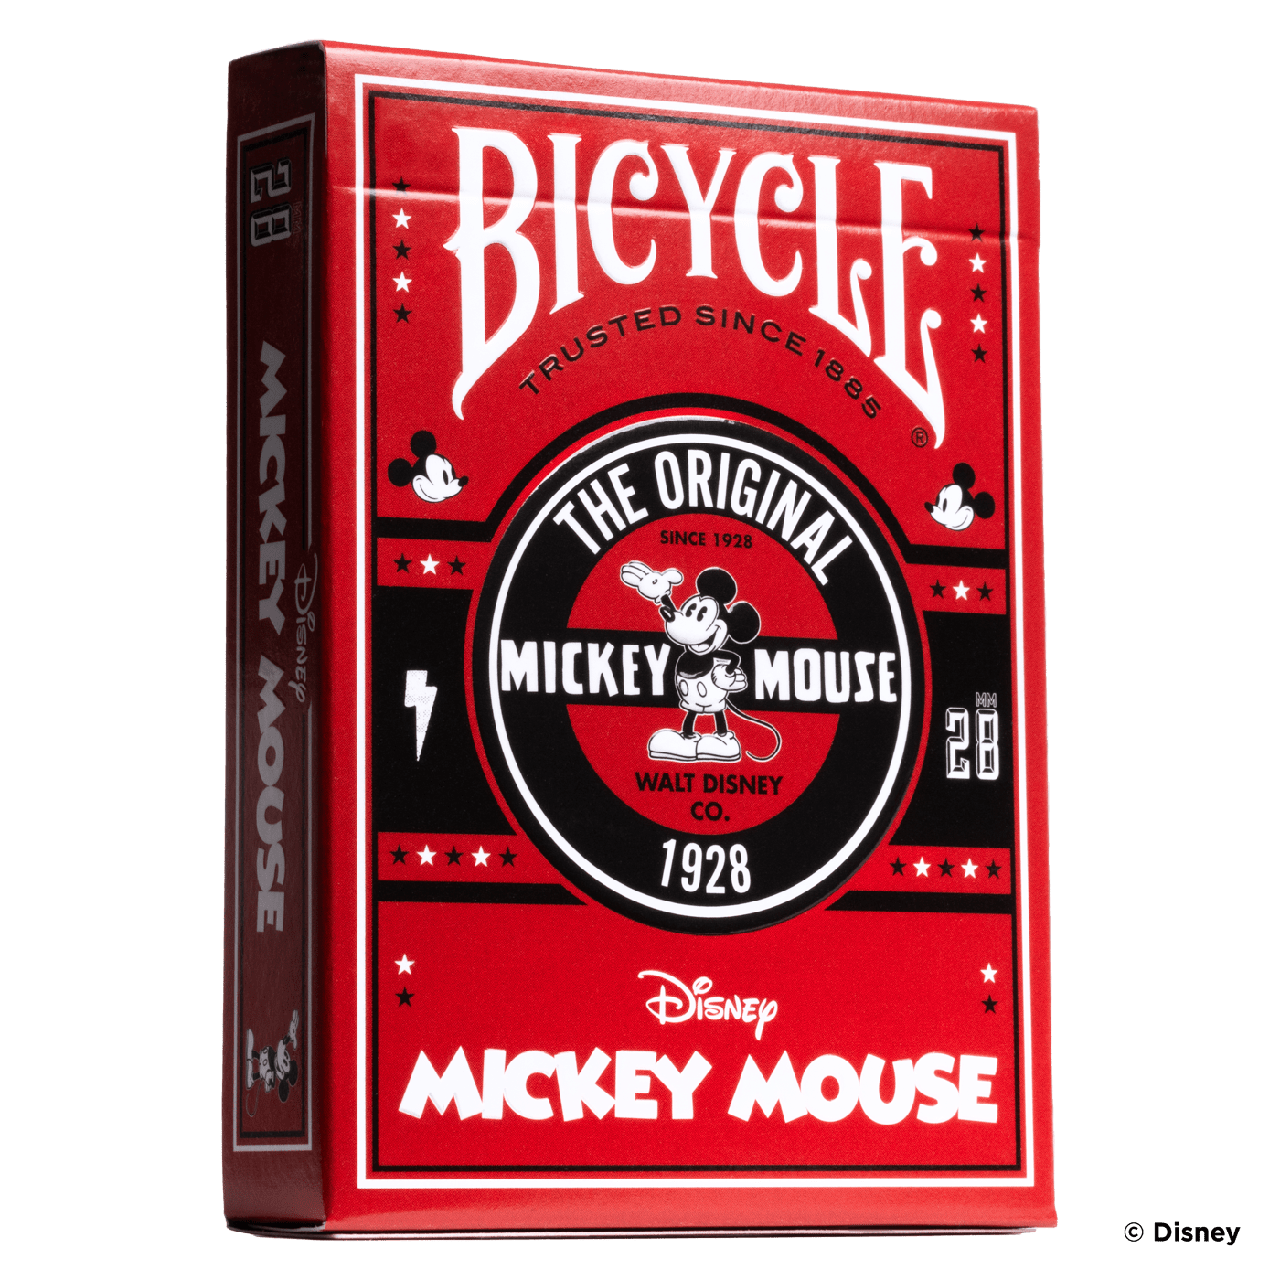 Bicycle Disney Classic Mickey Mouse playing cards - фото 1 - id-p115434624